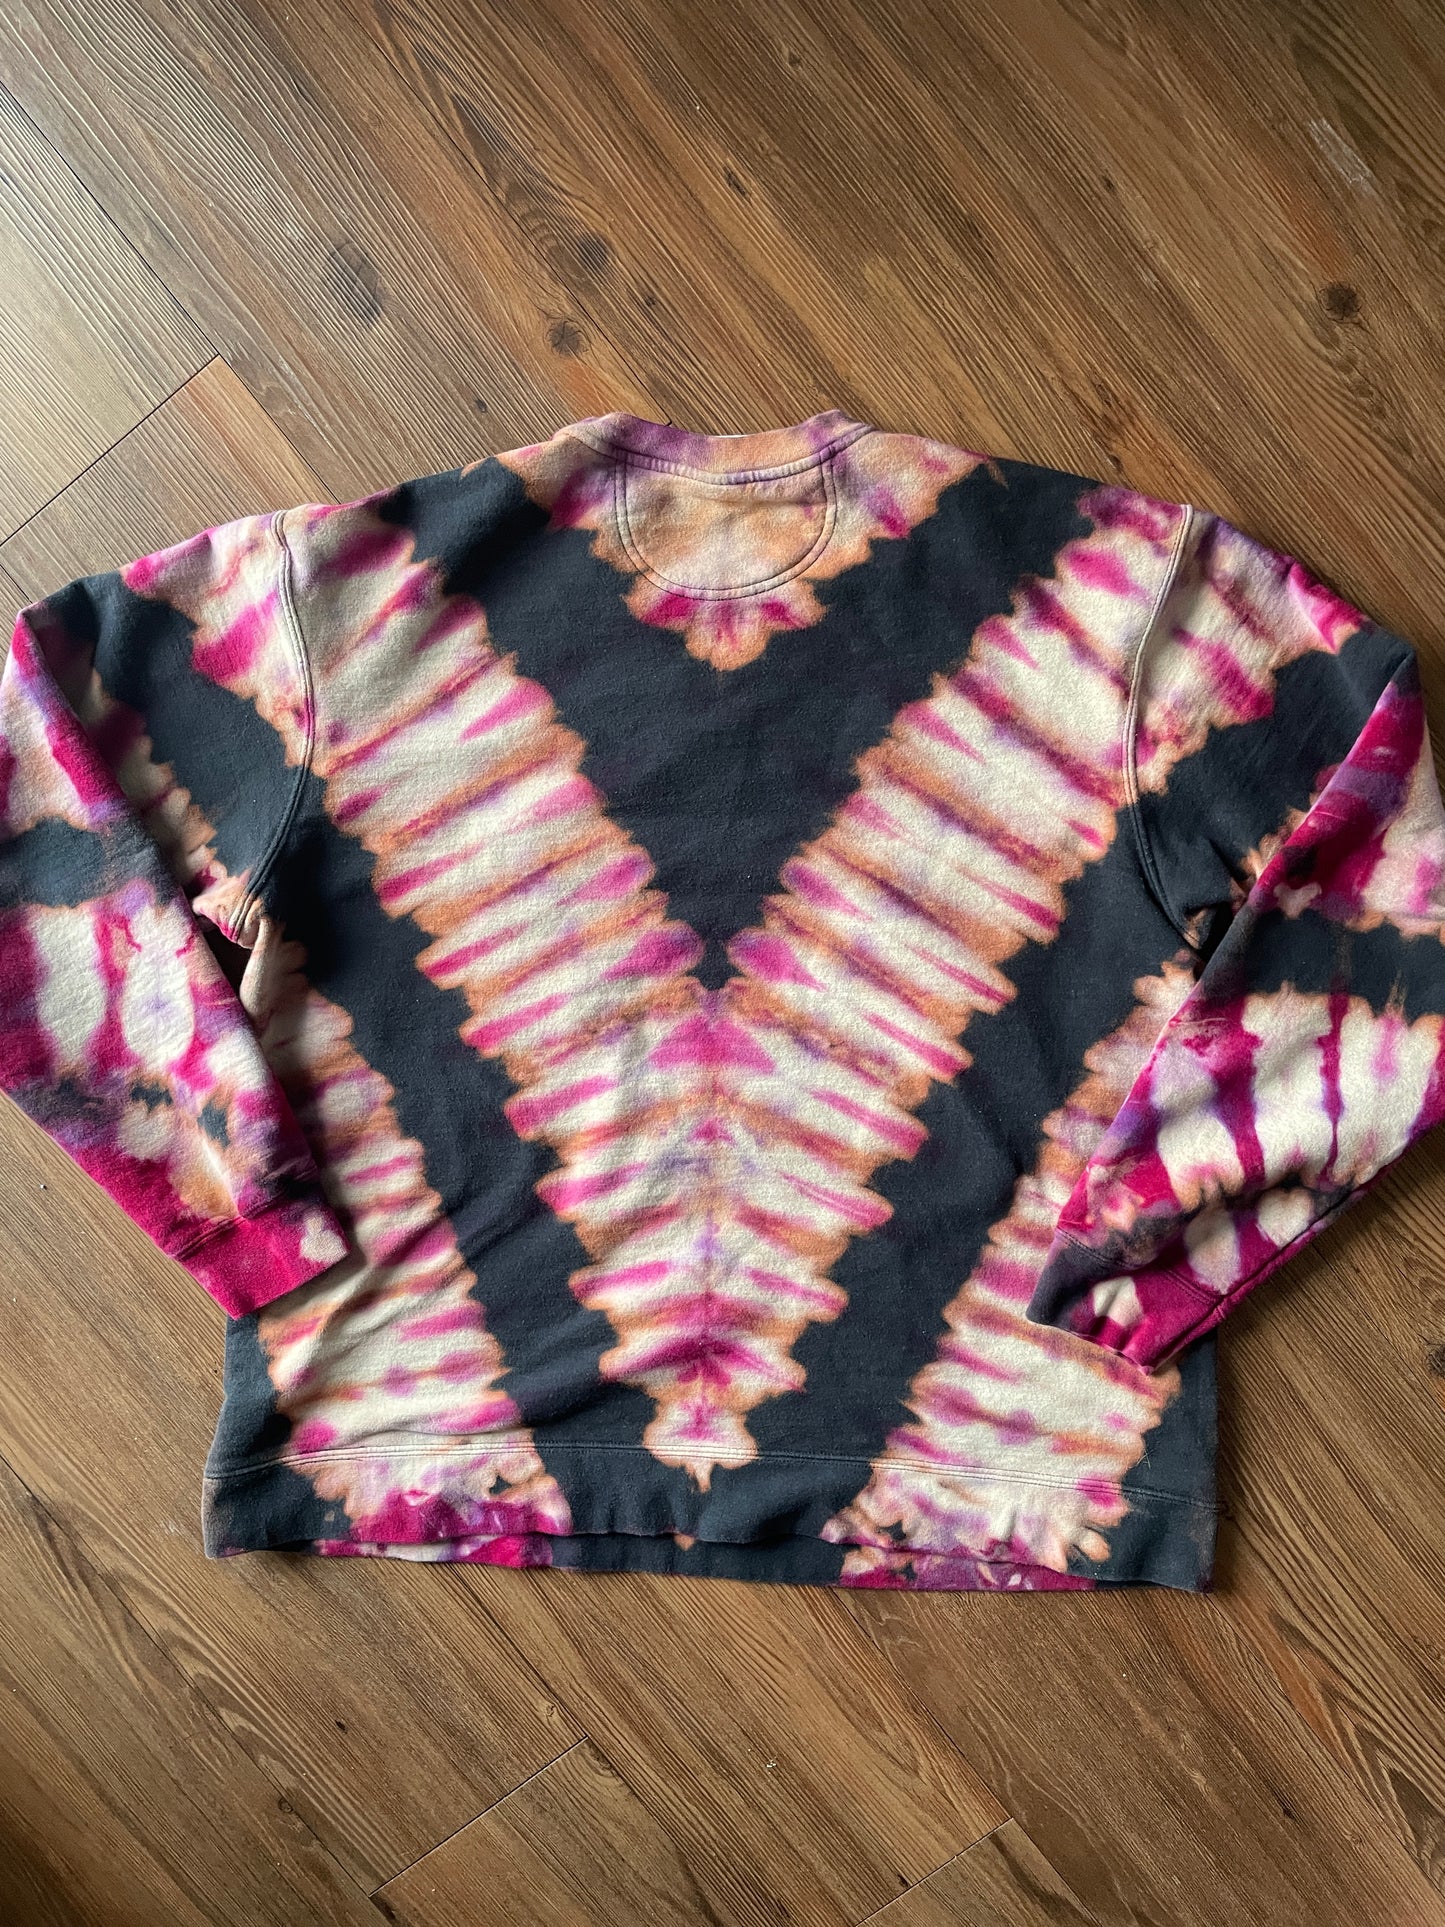 XL Men’s Retro Mountainscape Handmade Tie Dye Sweatshirt | One-Of-a-Kind Black and Pink Long Sleeve